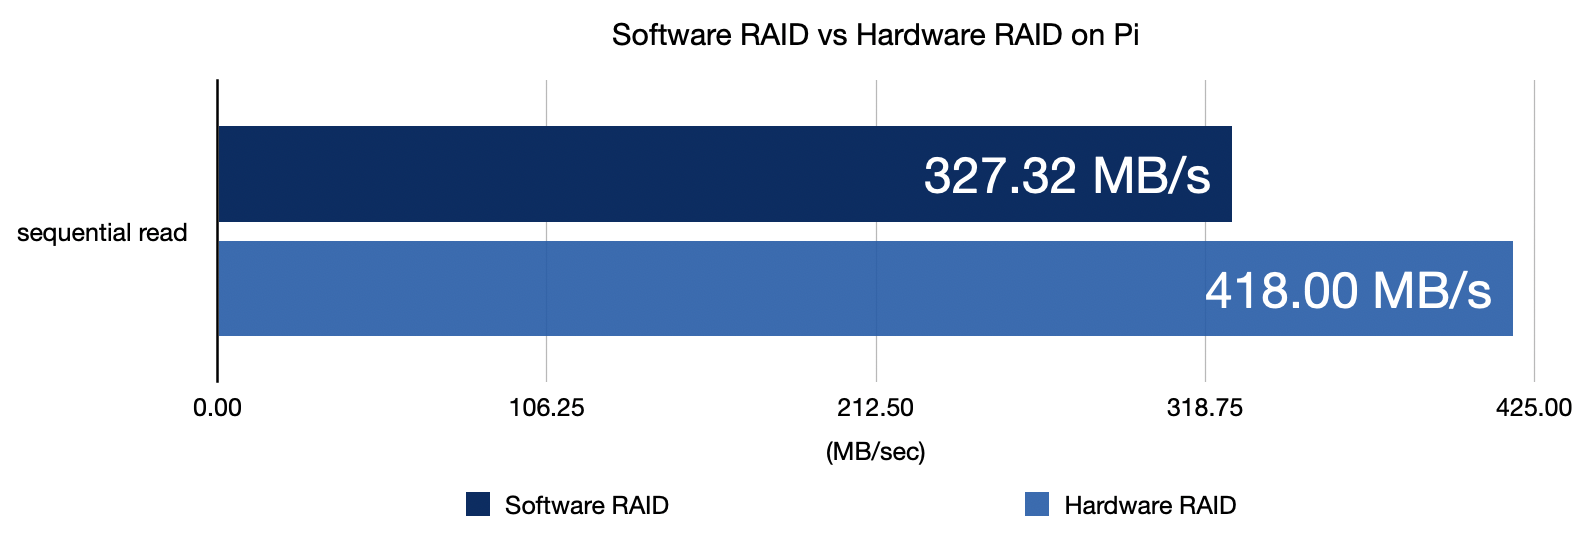 Sequential read performance on Raspberry Pi - Software vs Hardware RAID